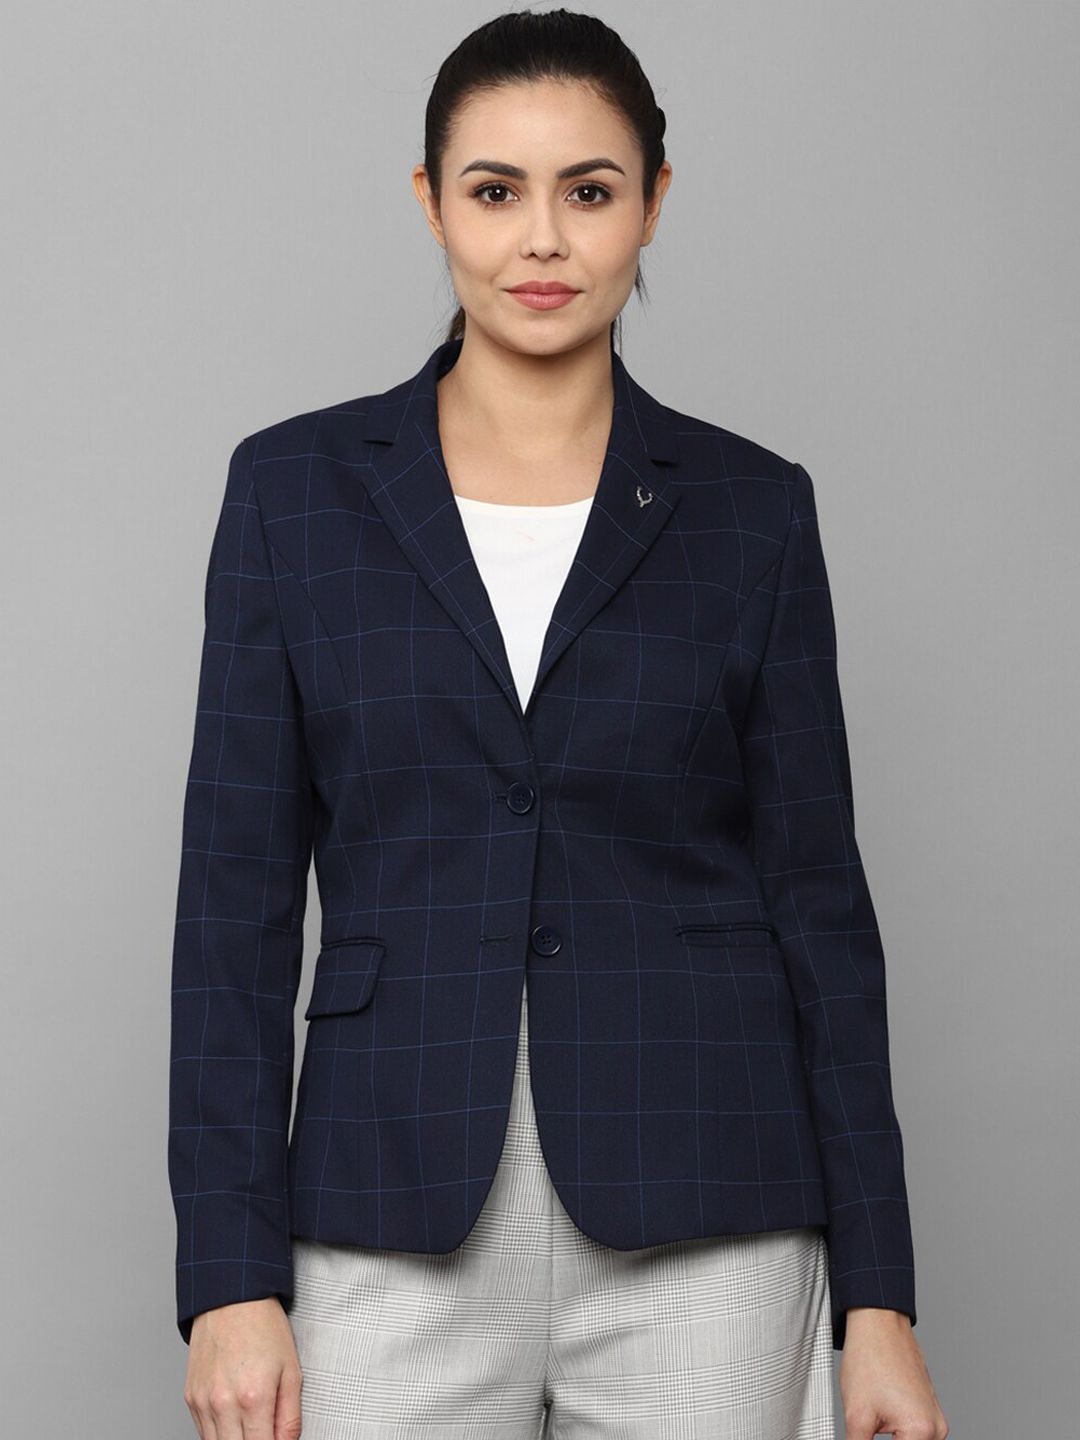 Allen Solly Woman Navy Blue Checked Single-Breasted Blazer Price in India